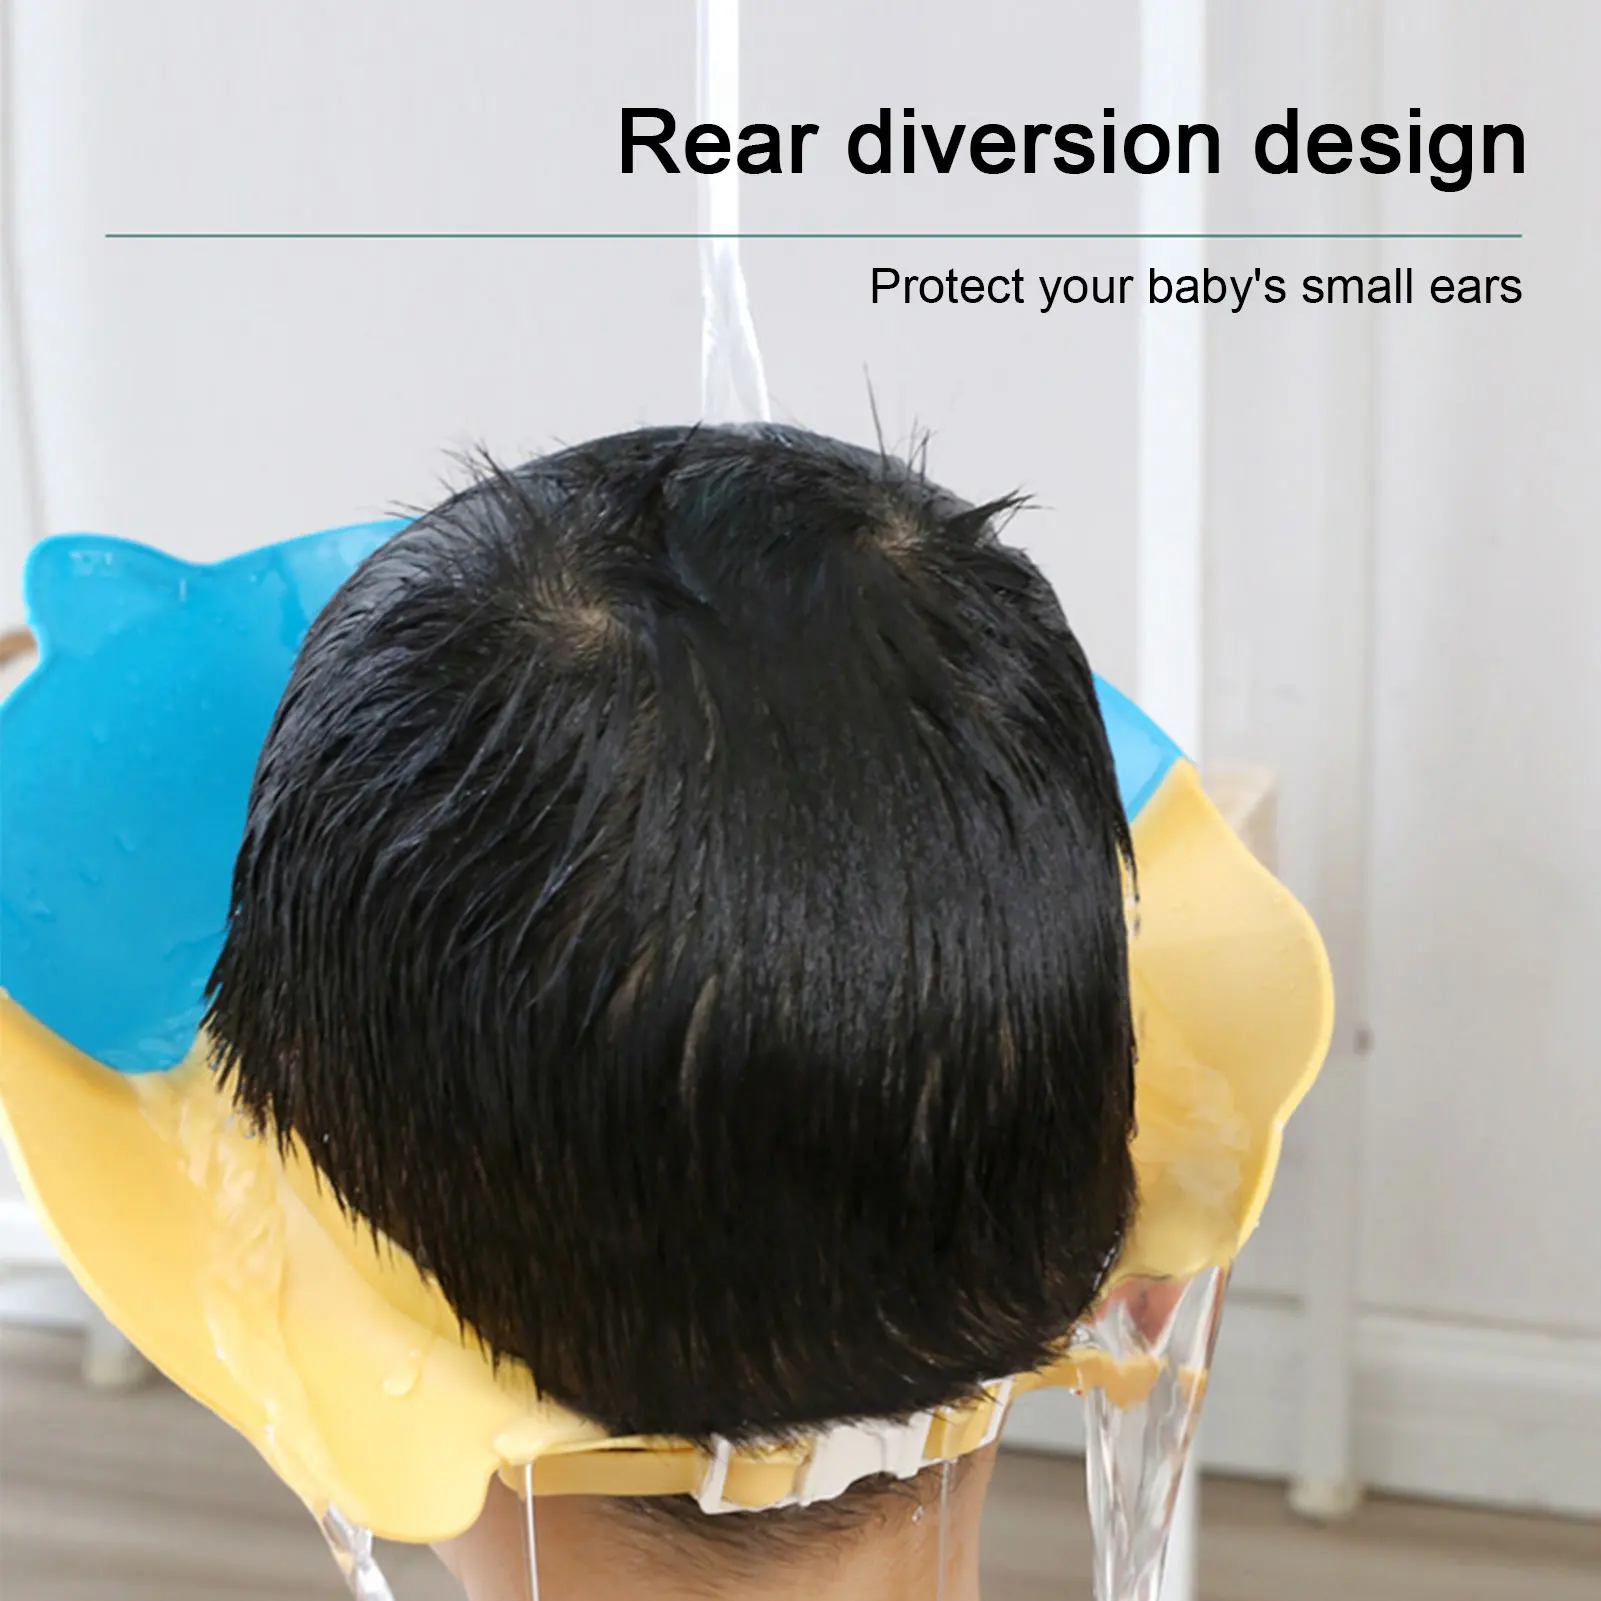 Baby Safe Shampoo Shower Caps Adjustable Bath Protection Caps Hat for Baby Newborn Infant Wash Hair Cover Shield Ear Protector